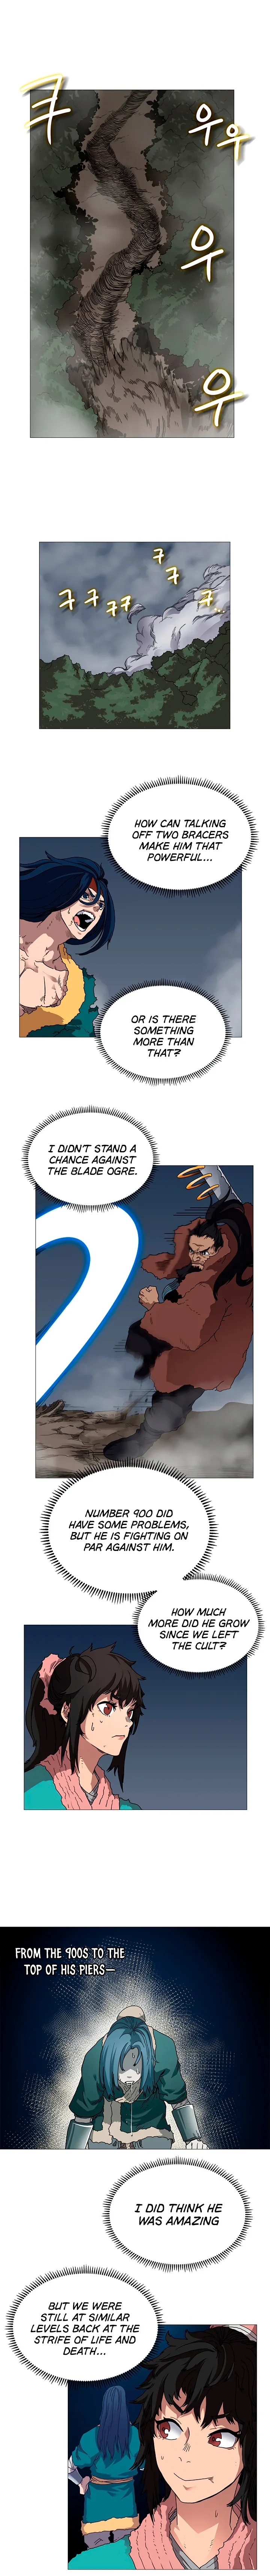 the-chronicles-of-heavenly-demon-chap-34-3